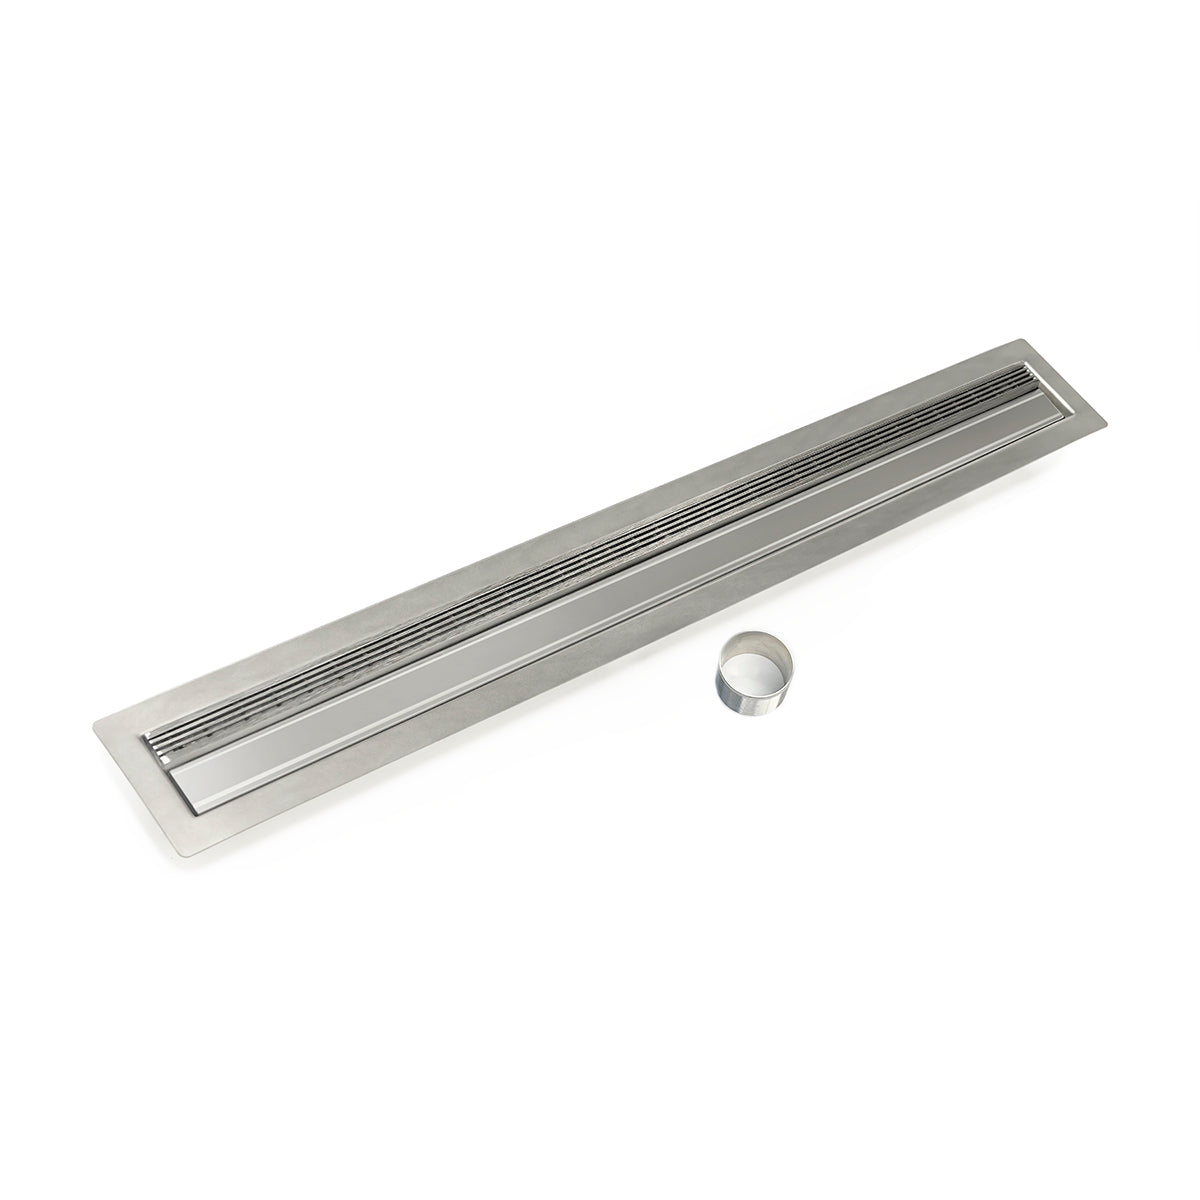 Infinity Drain 48" FCB Series Double Waterproofing Linear Drain Kit with 1" Wedge Wire Grate